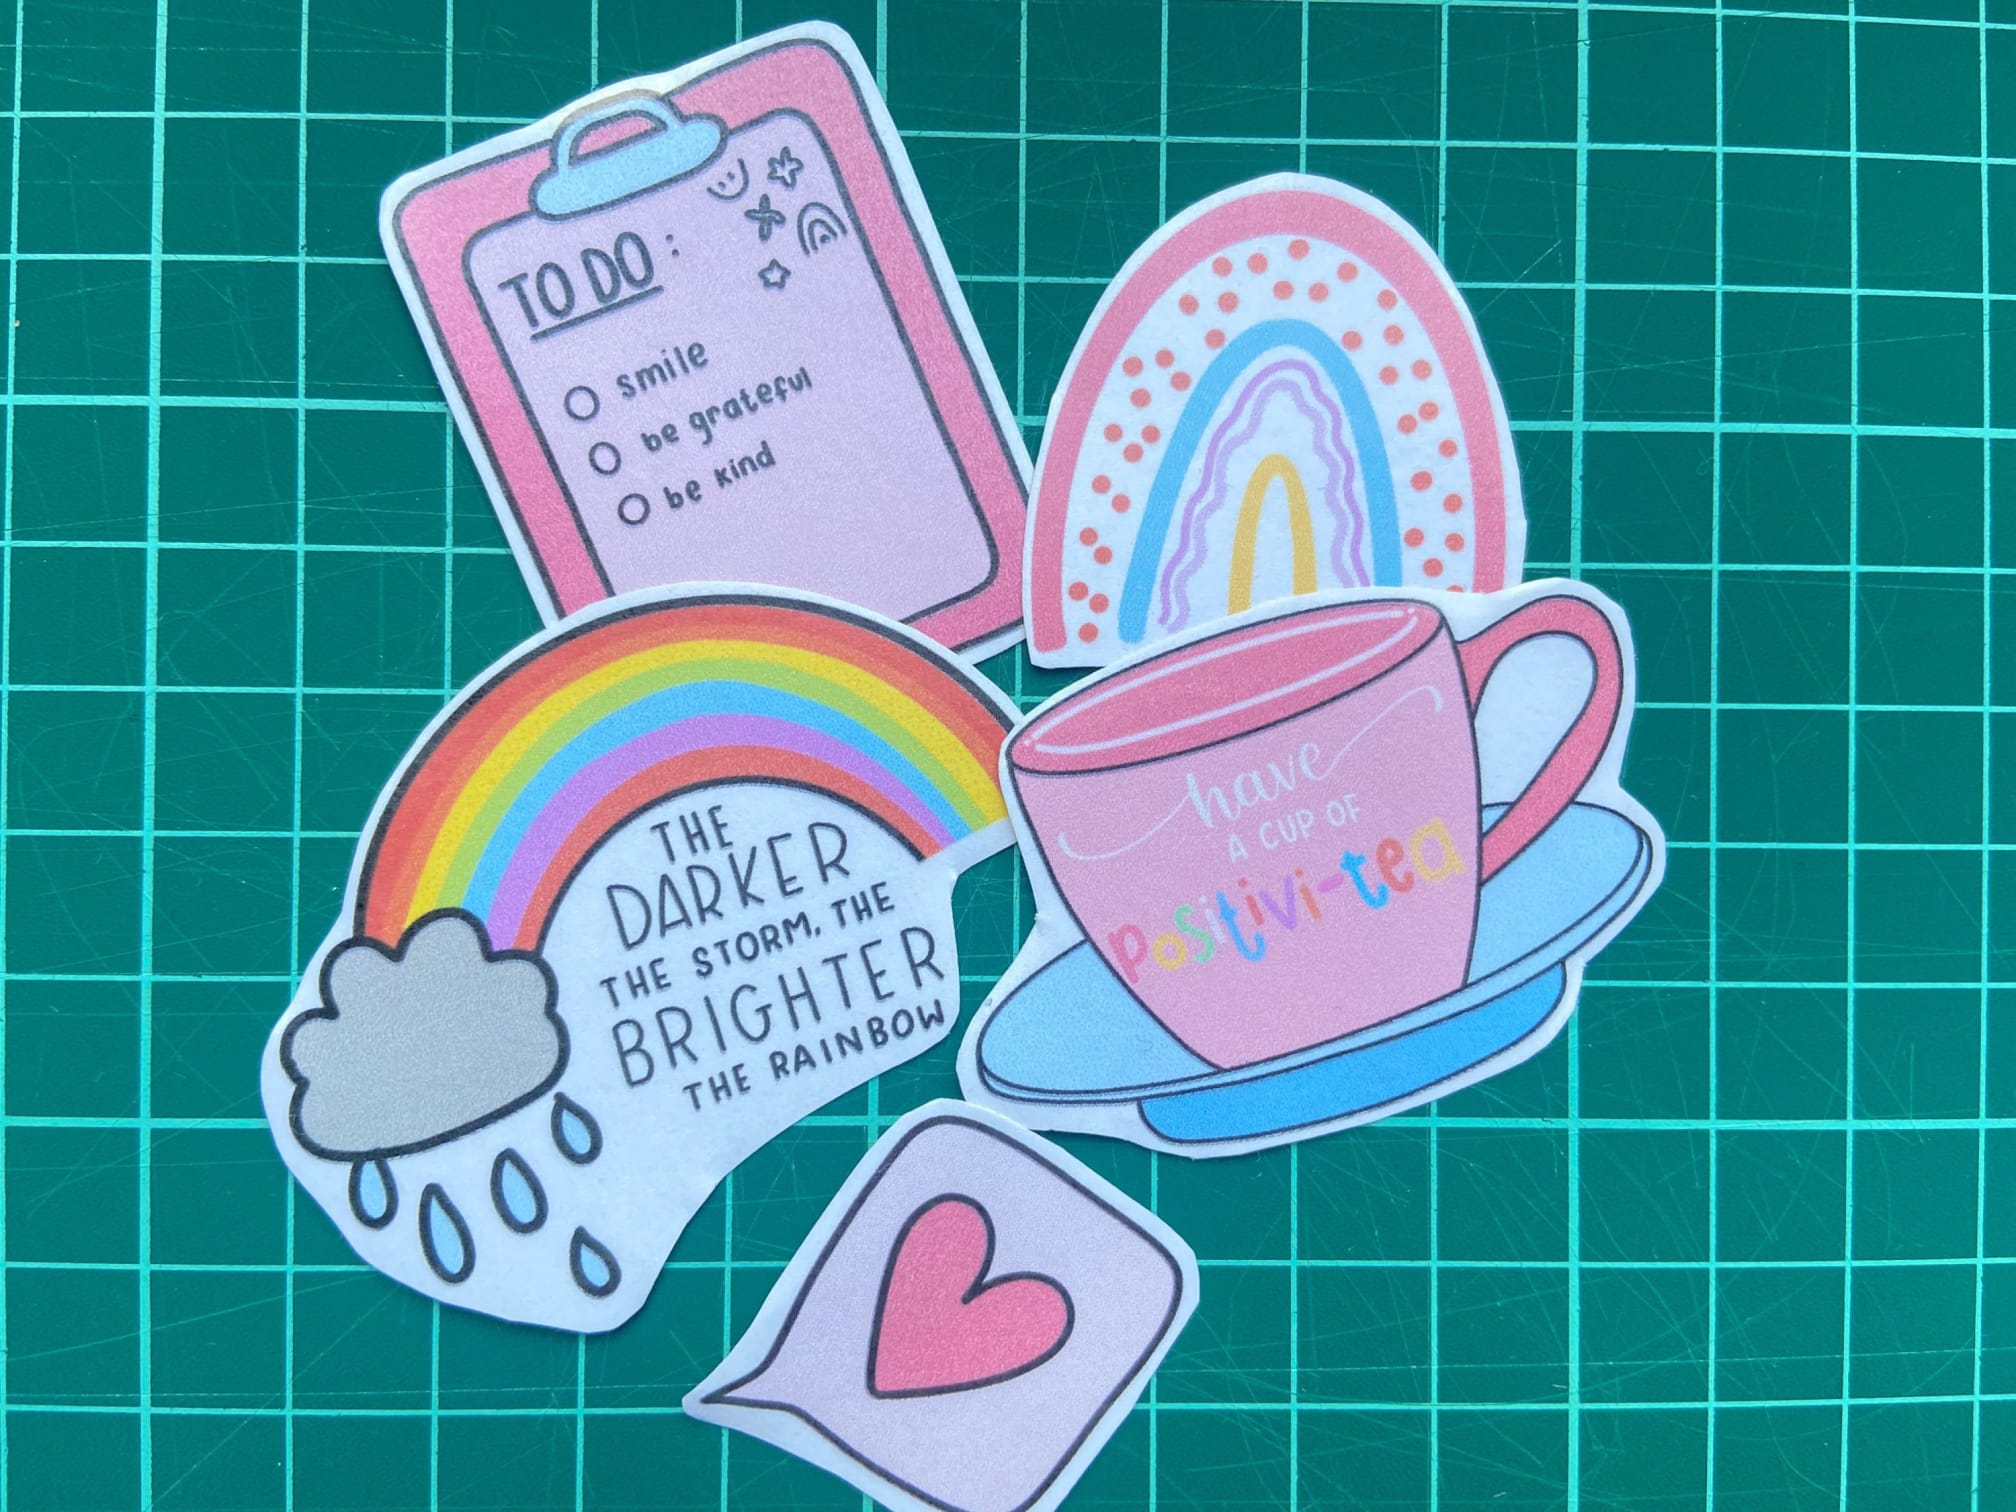 A set of 5 colourful stickers including a rainbow, a checklist and a cup of coffee